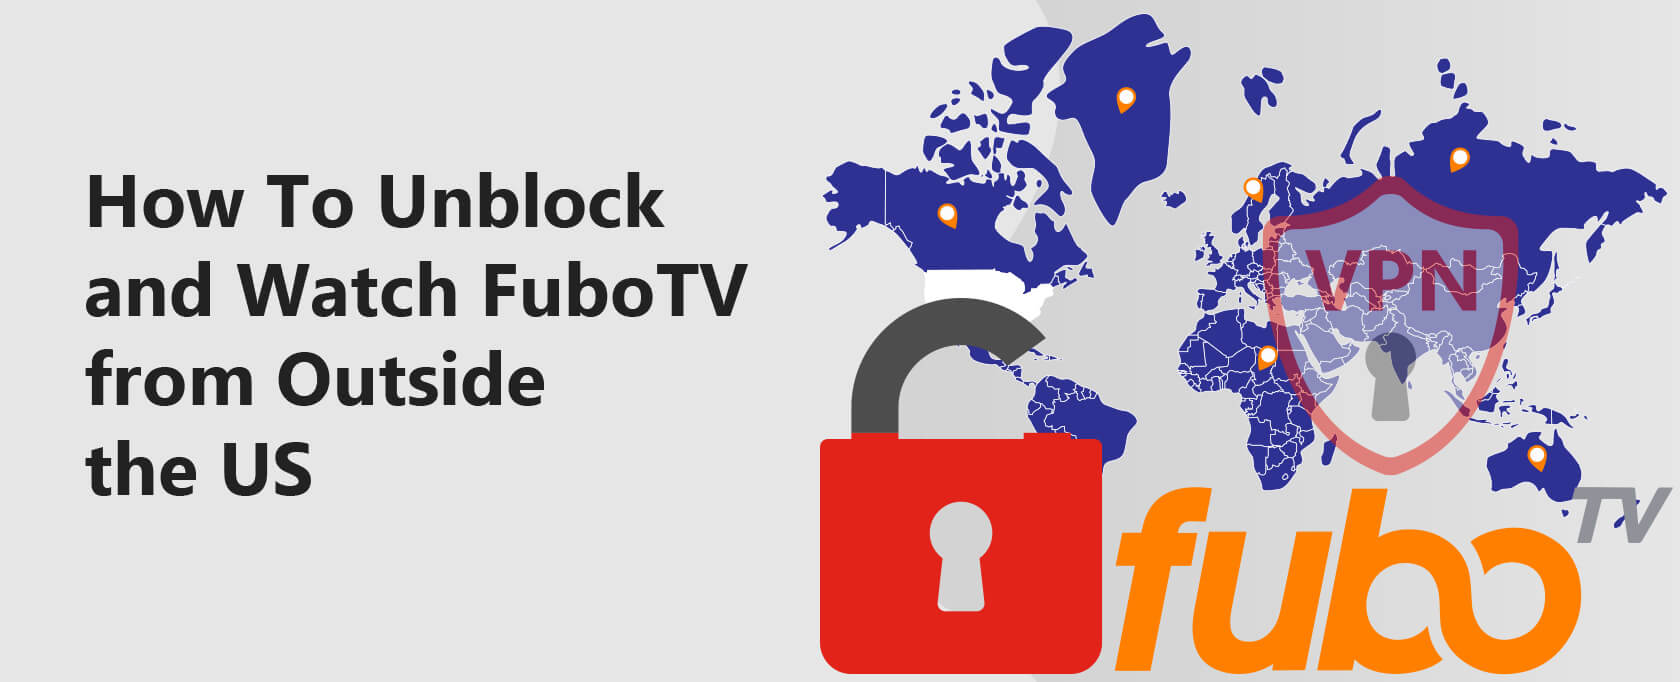 FuboTV VPN: How To Watch and Unblock FuboTV from Outside the US